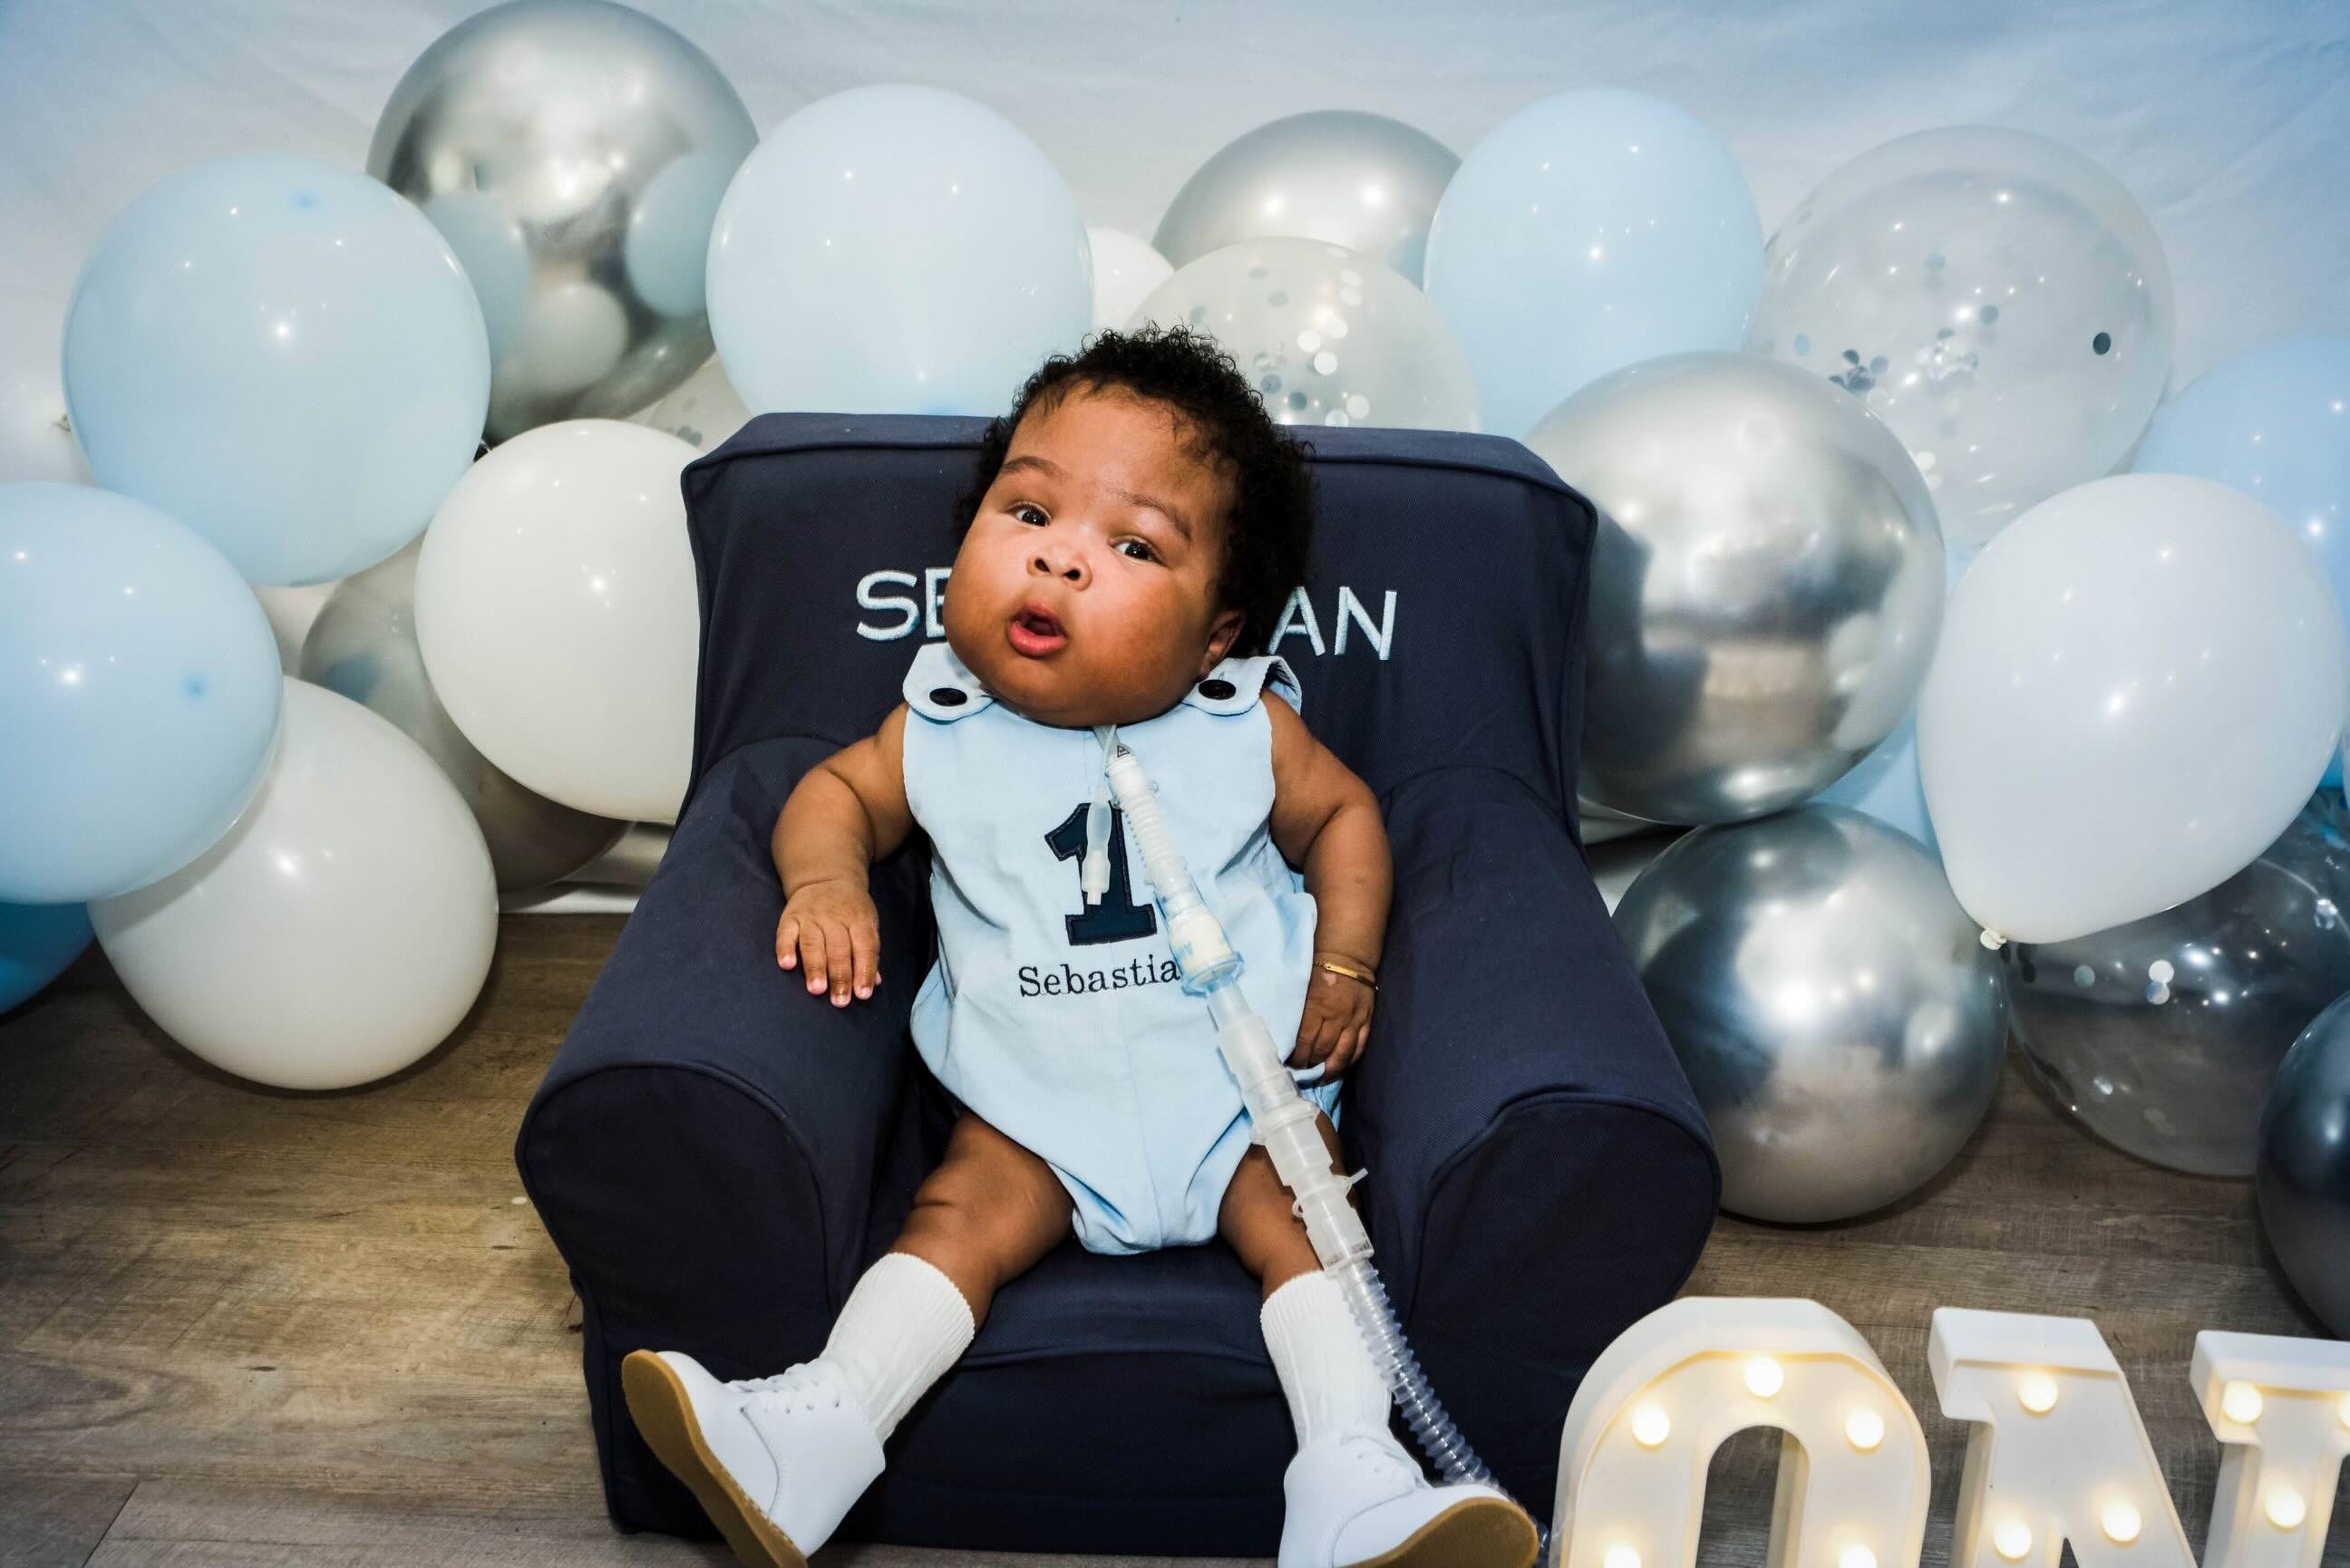 DIY Decorations For Sebastian's 1st Birthday: Sprucing Up Your Home For The Celebration